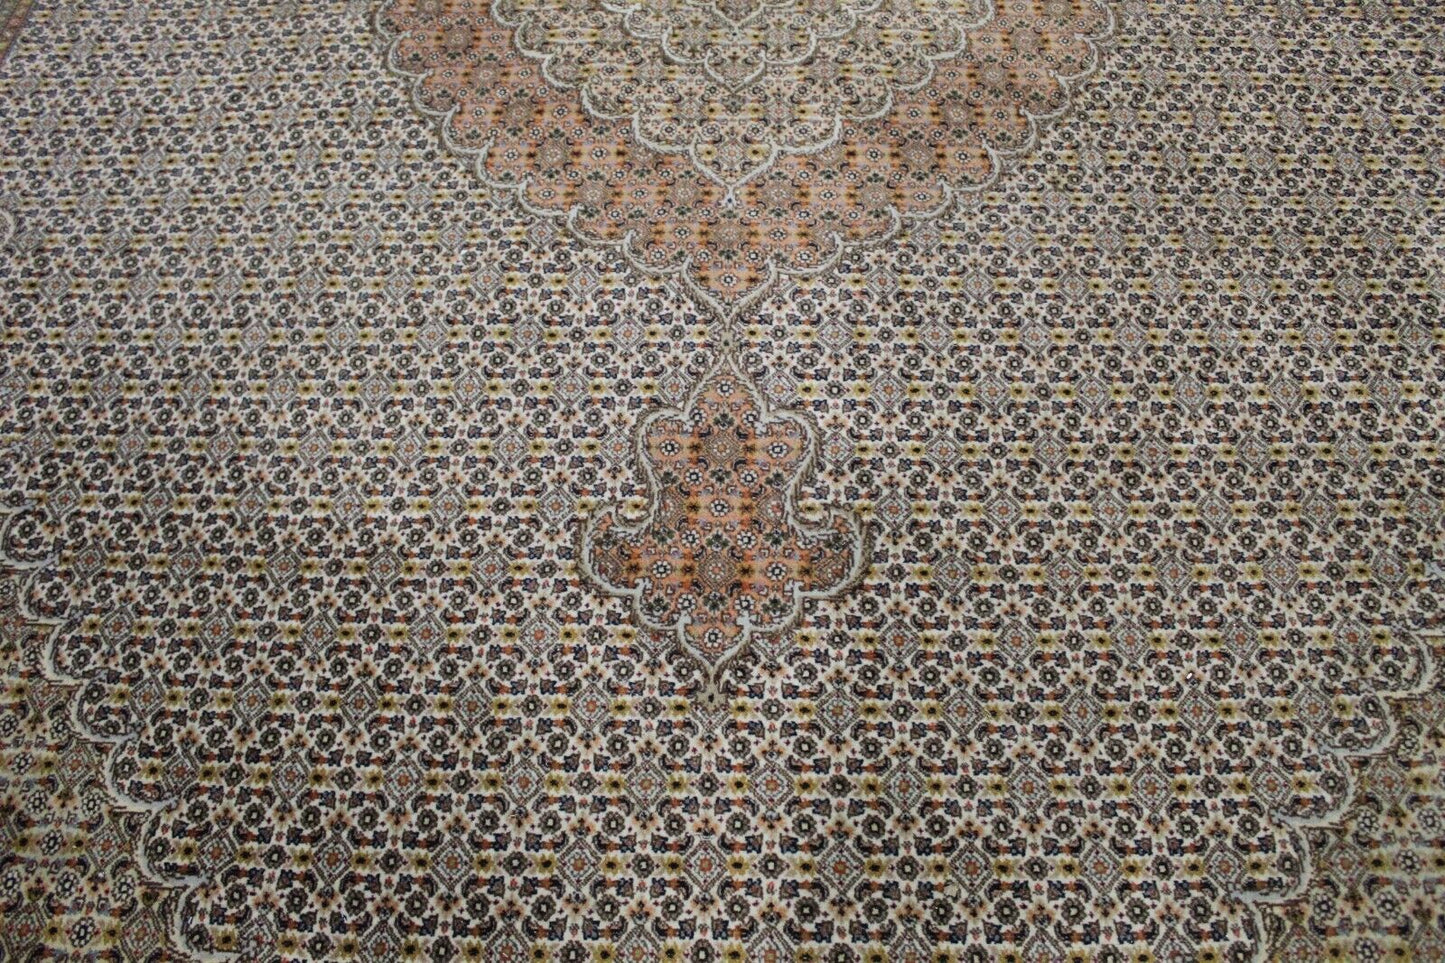 Fine Wool Material Ensures Durability and Comfort Underfoot on Vintage Tabriz Rug - 1960s